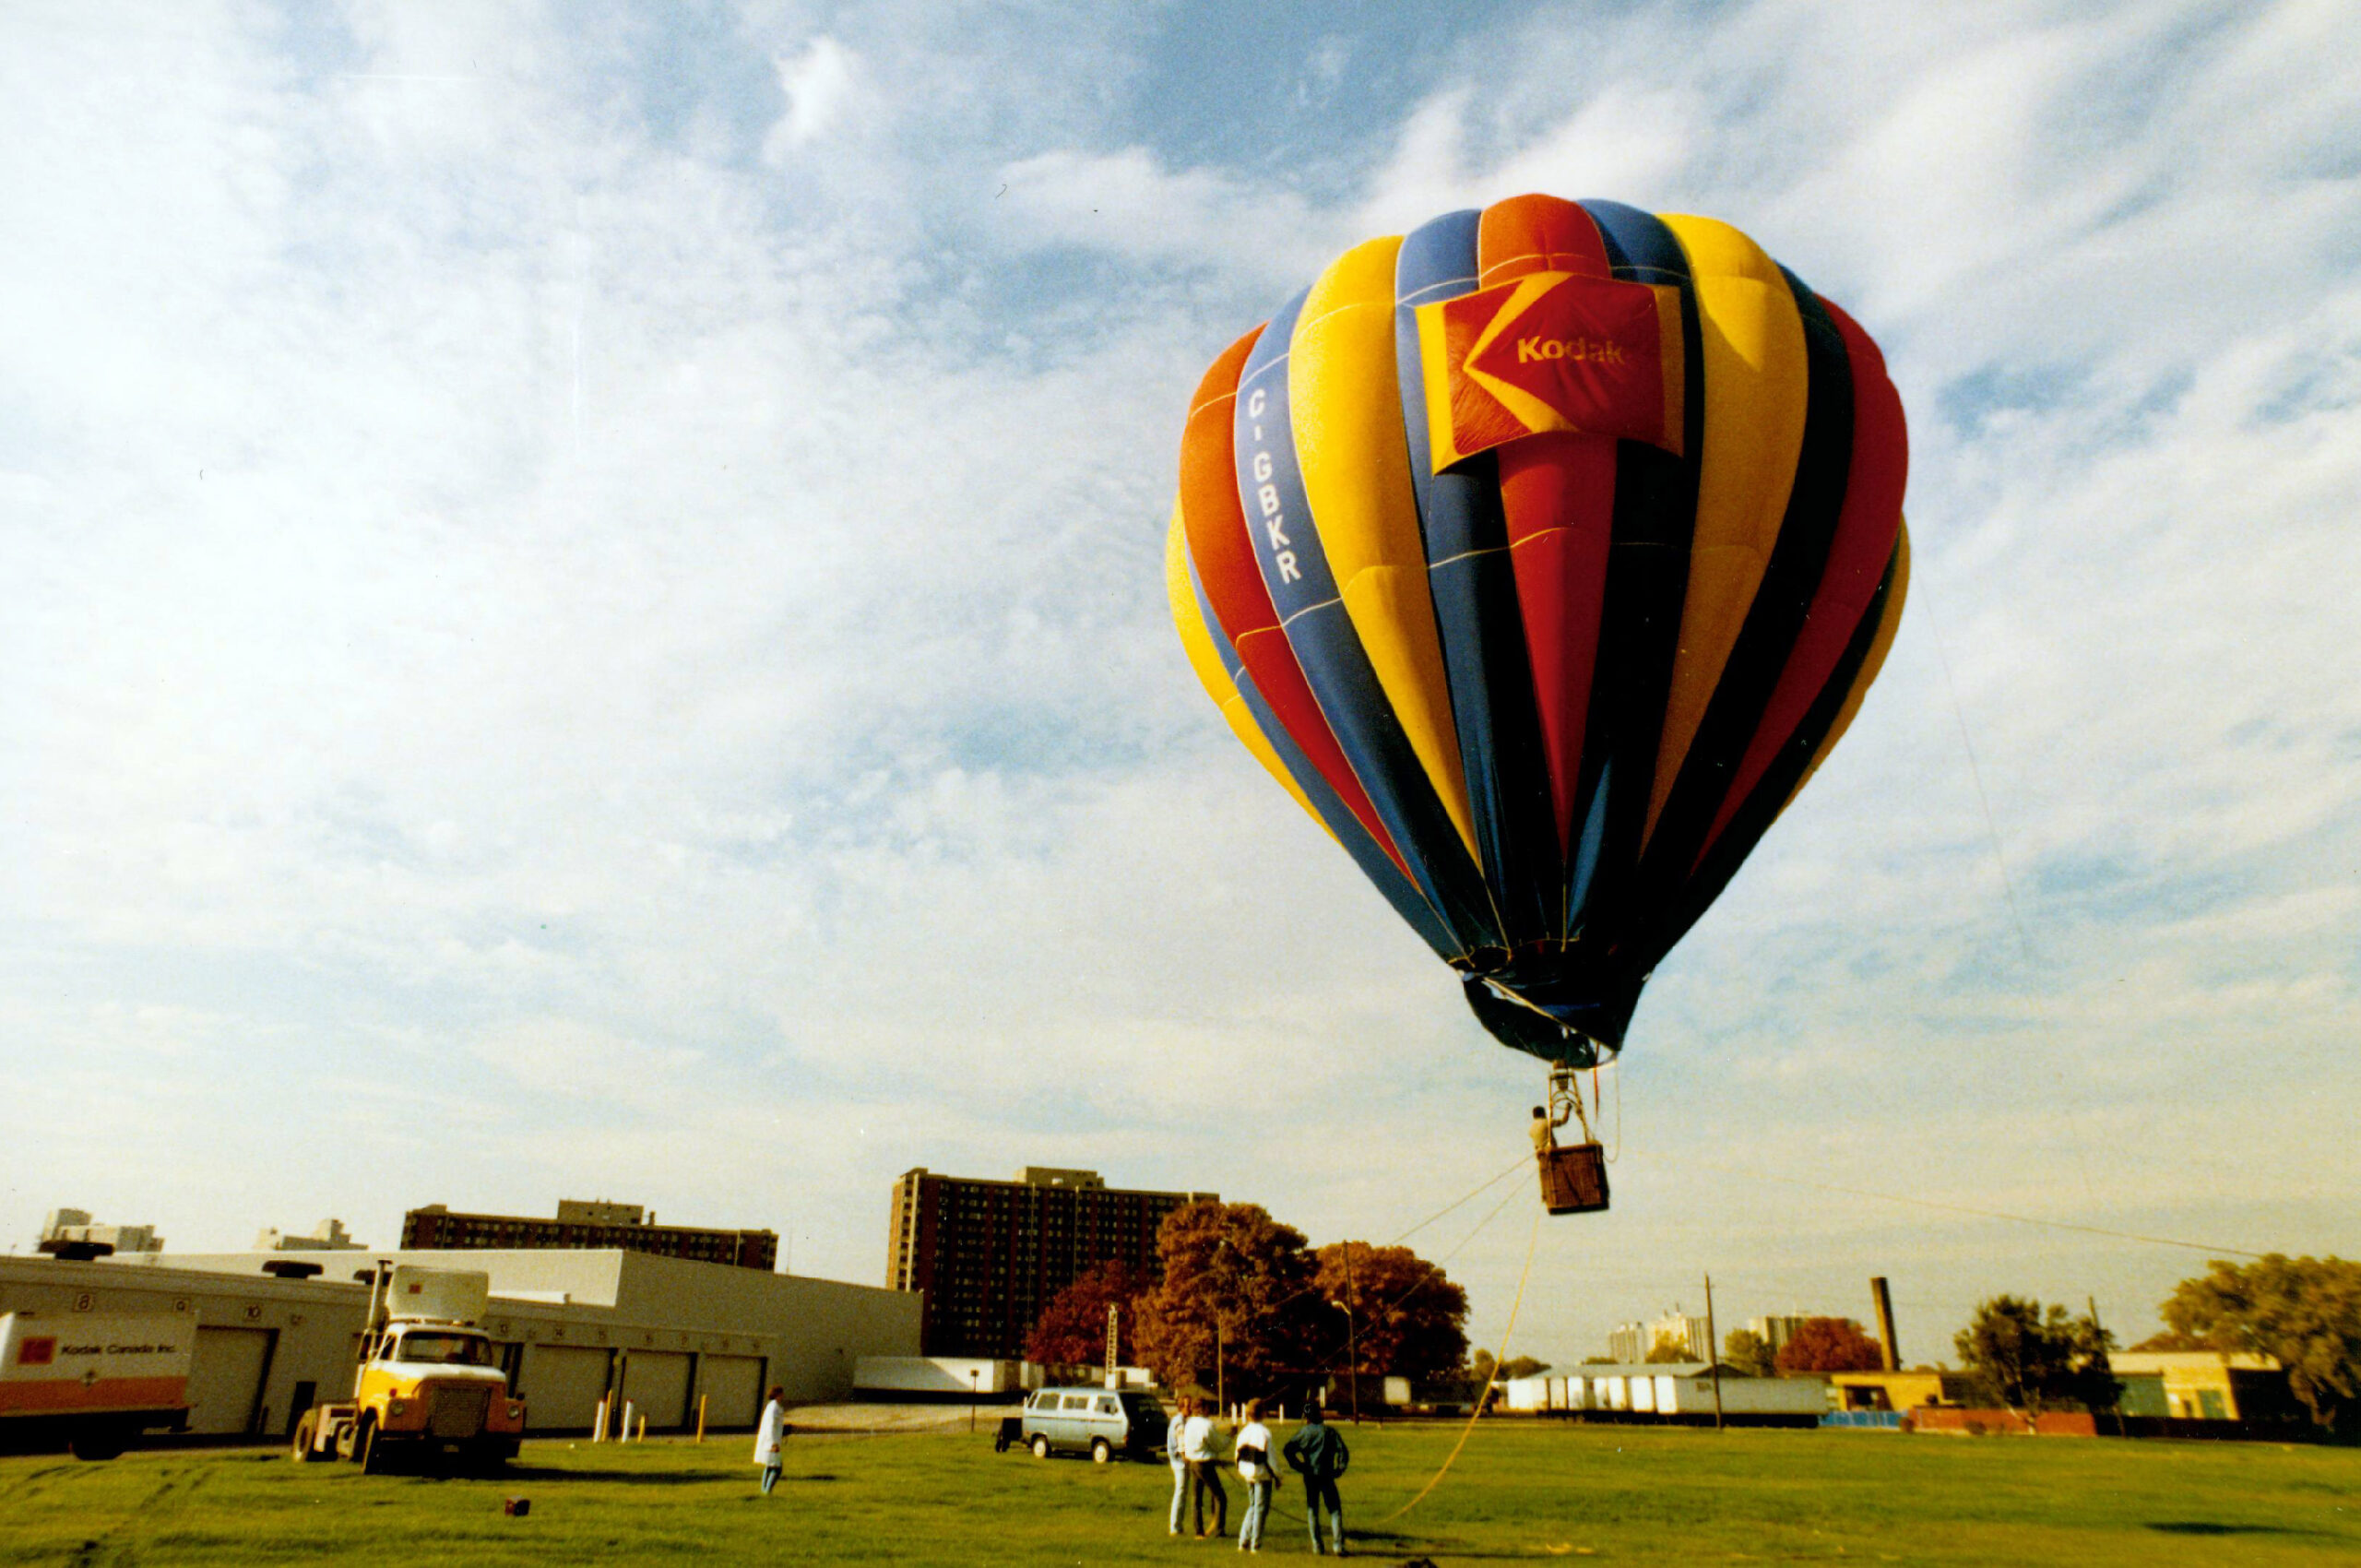 Hot air balloon with red, yellow and blue stripes with the Kodak logo